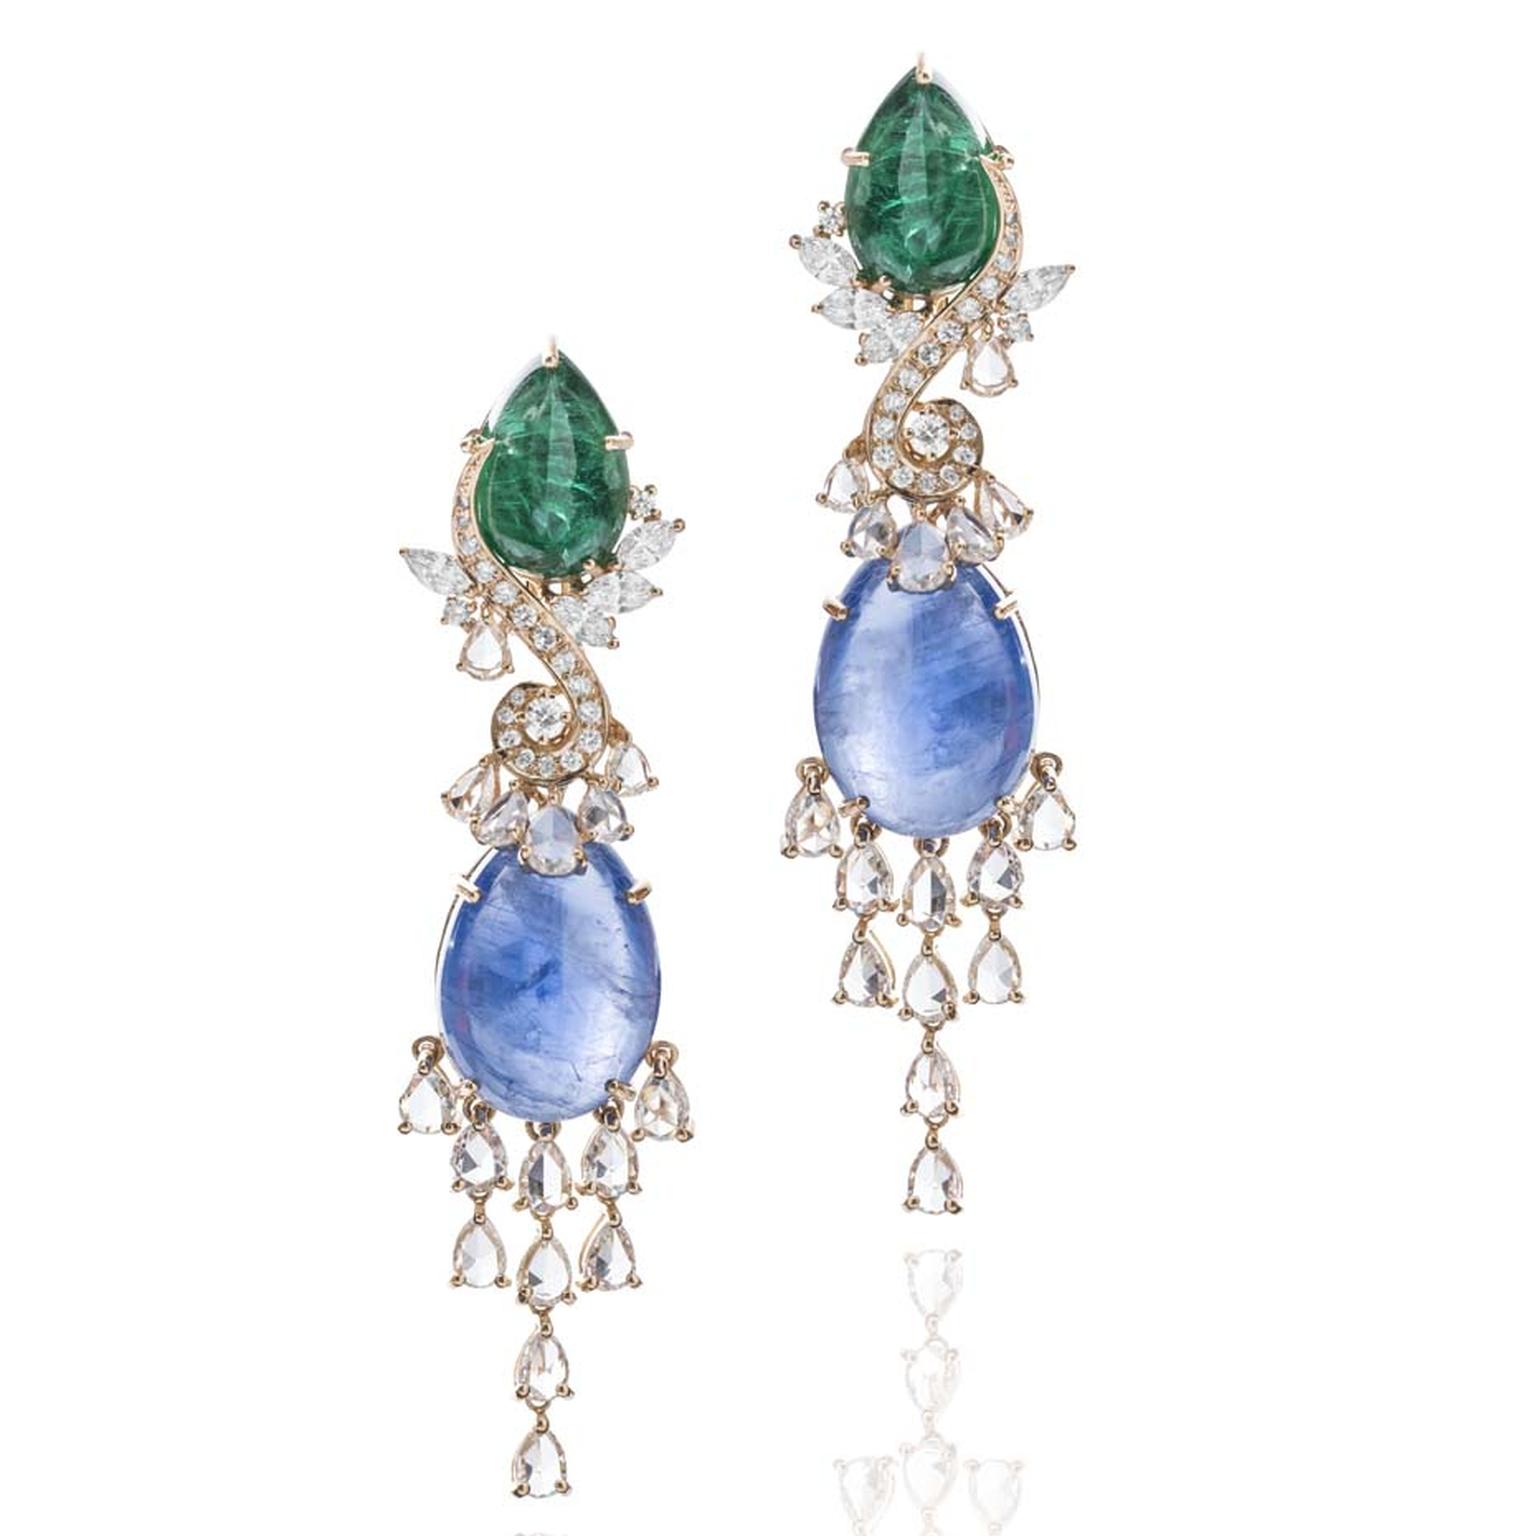 Farah Khan Le Jardin Exotique cabochon emerald, blue sapphire and diamond earrings in yellow gold.